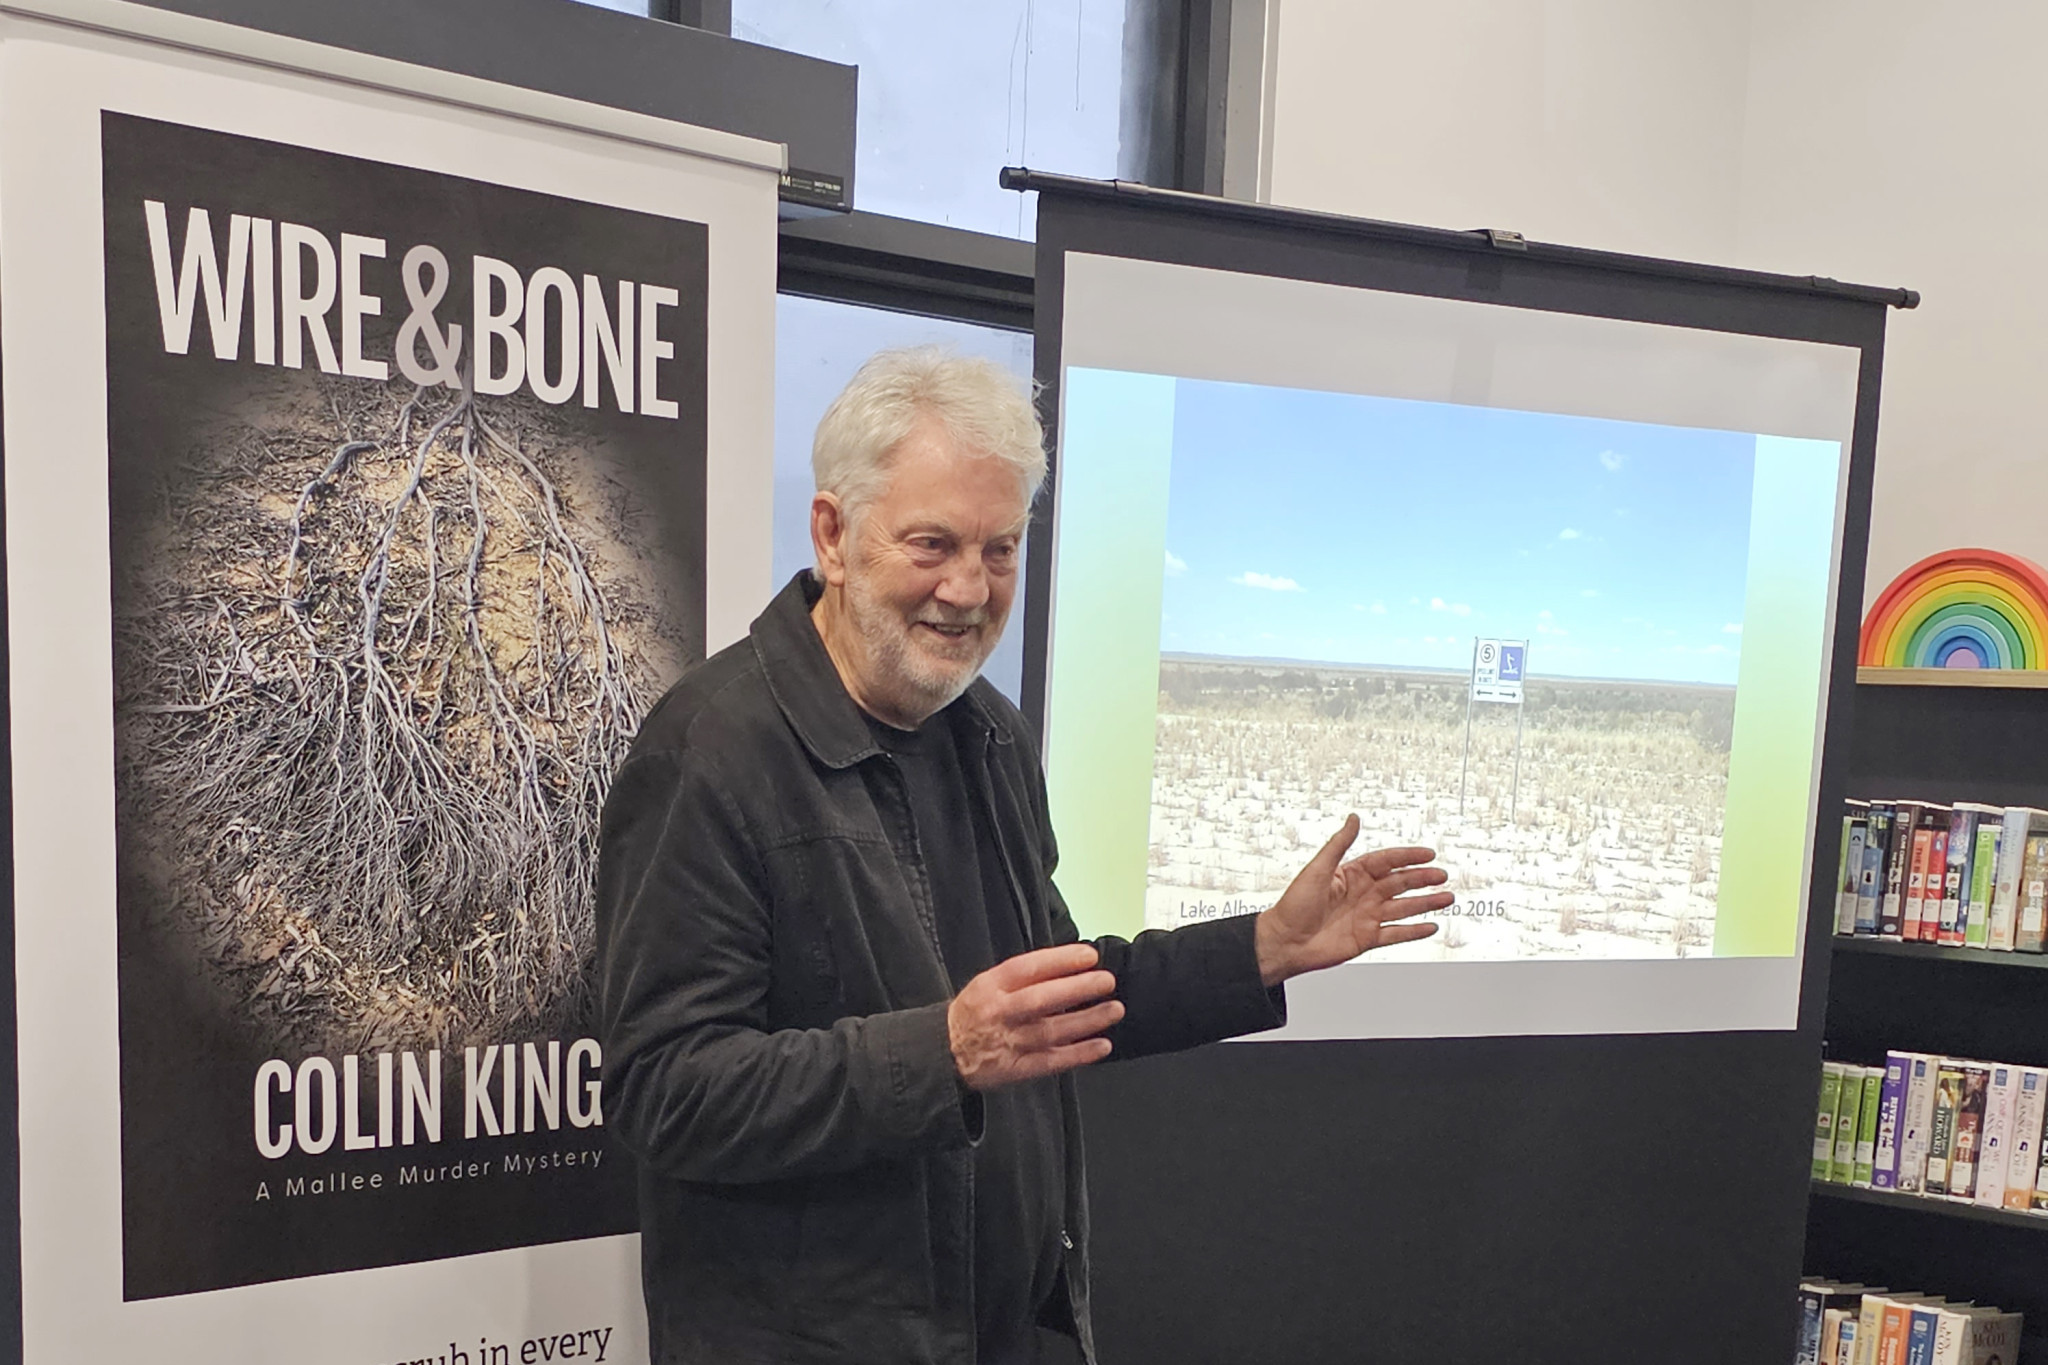 Colin King explains his connections to the local area which formed many scenes in his newest novel.